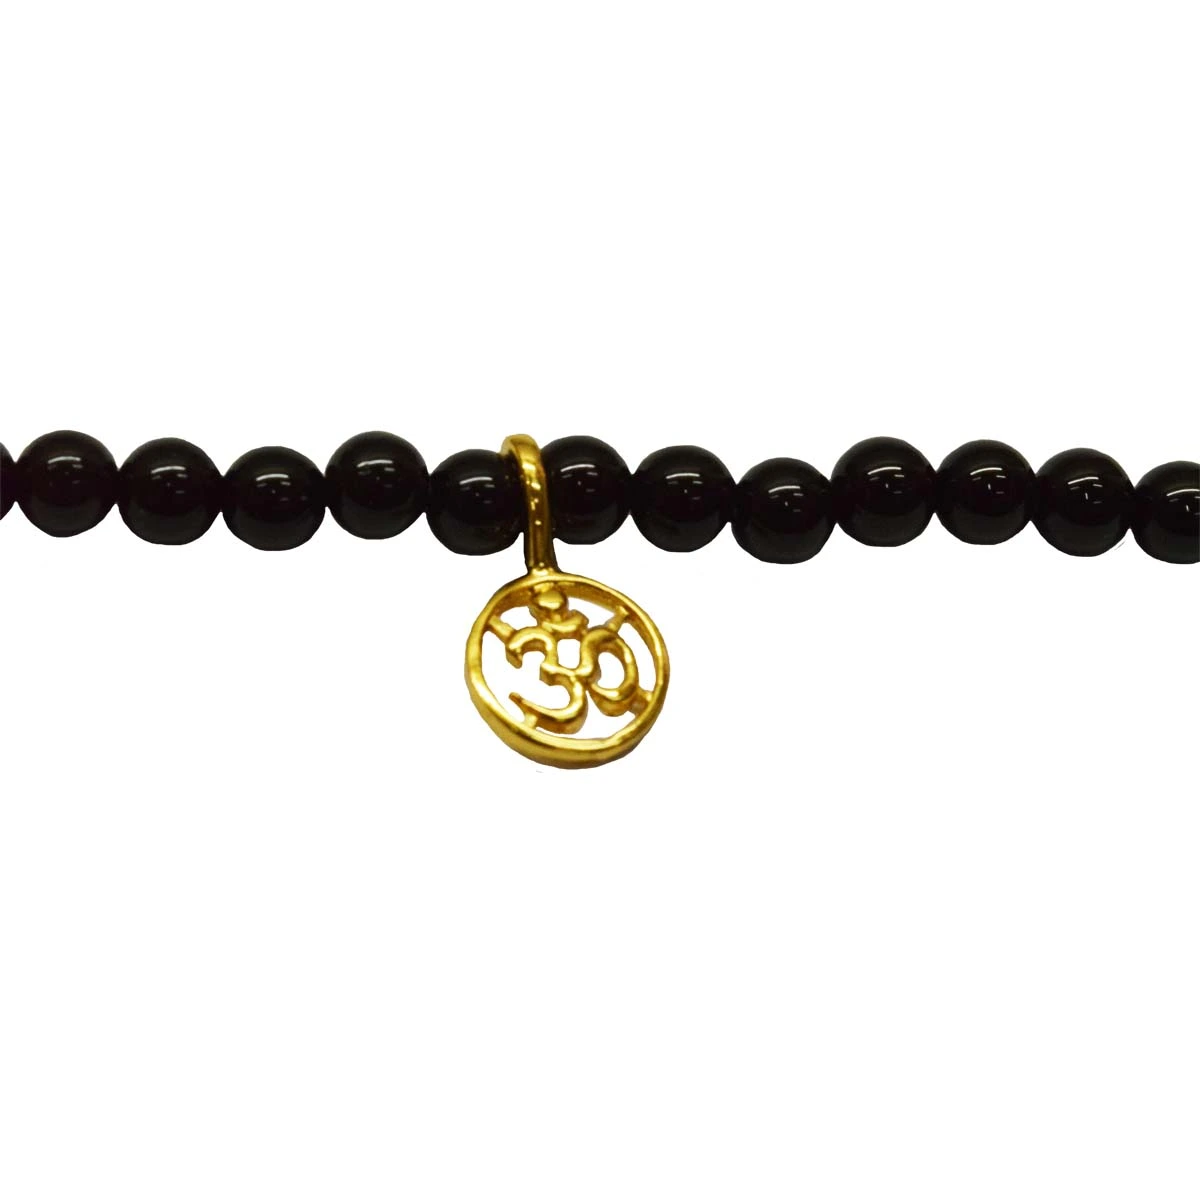 Gold Plated Sterling Silver Aum Charm with Black Onyx Bracelet (SB67)